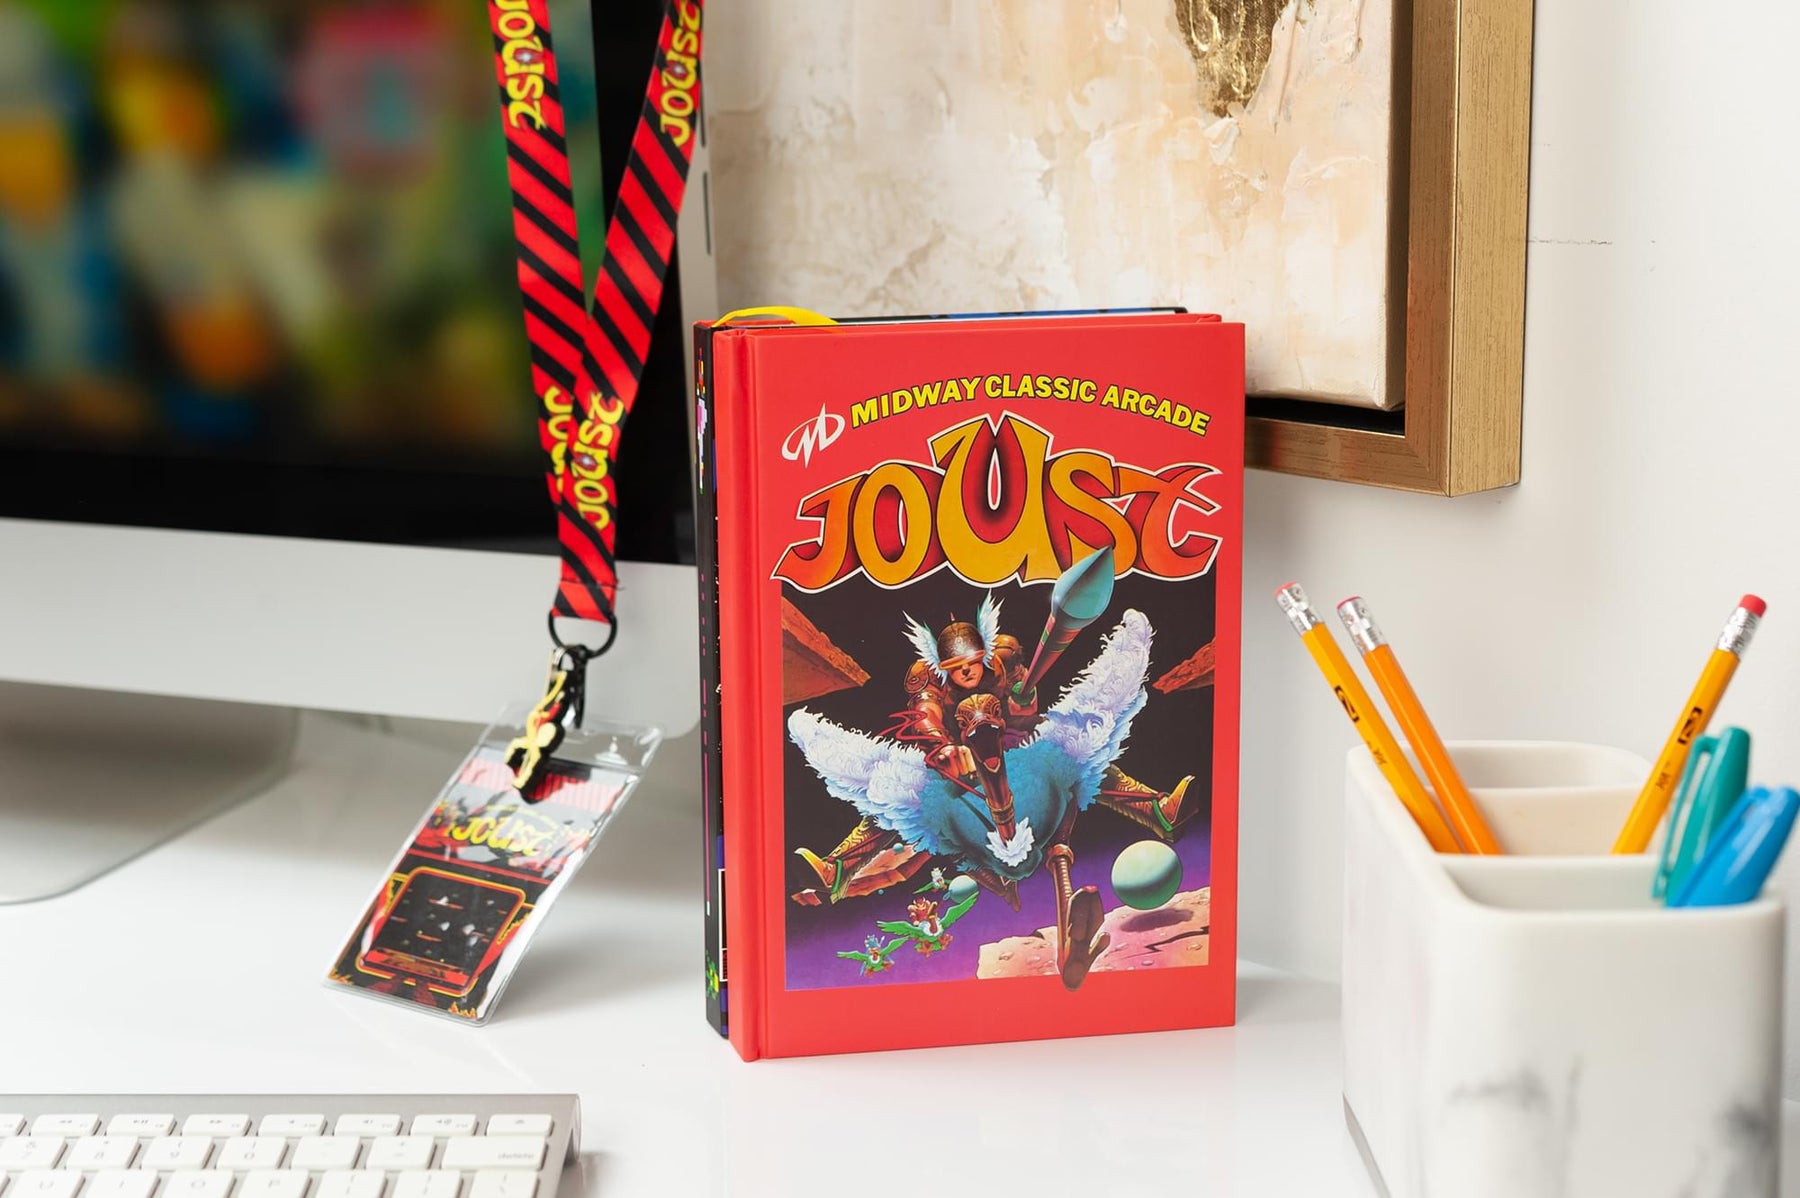 Midway Arcade Games Joust Hard Cover Ruled Journal With Ribbon Bookmark